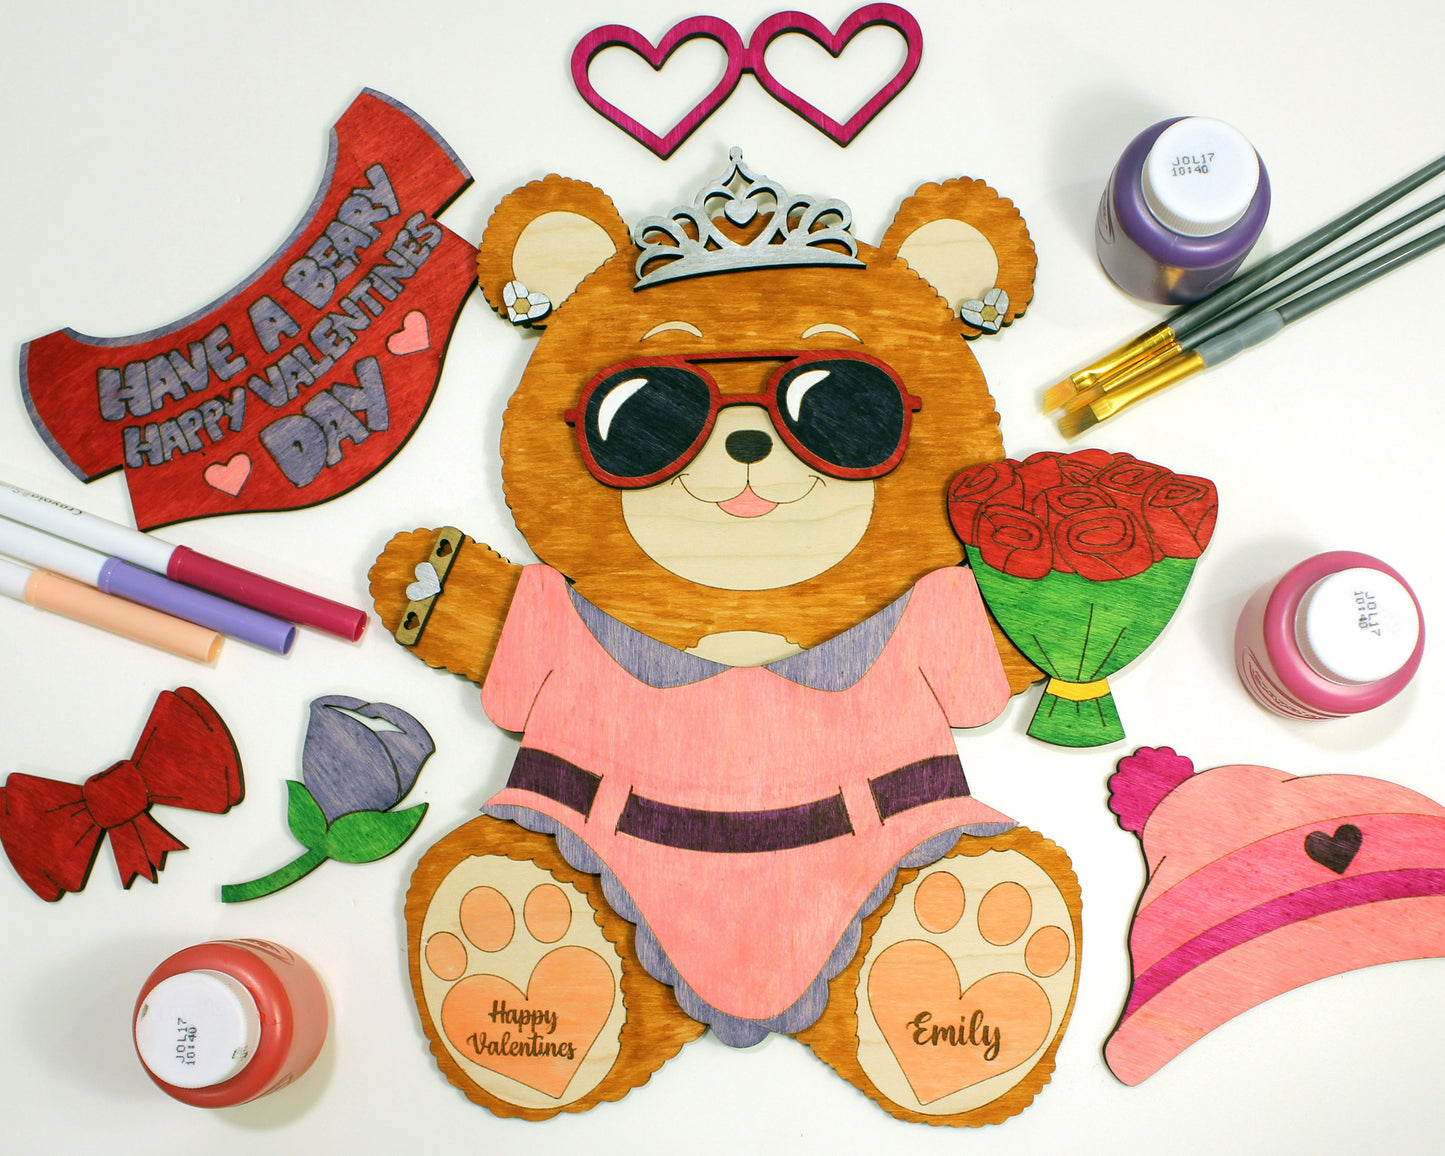 Valentines DIY Build a Bear Crafts - Girl & Boy Versions - SVG File Download - Sized for Glowforge